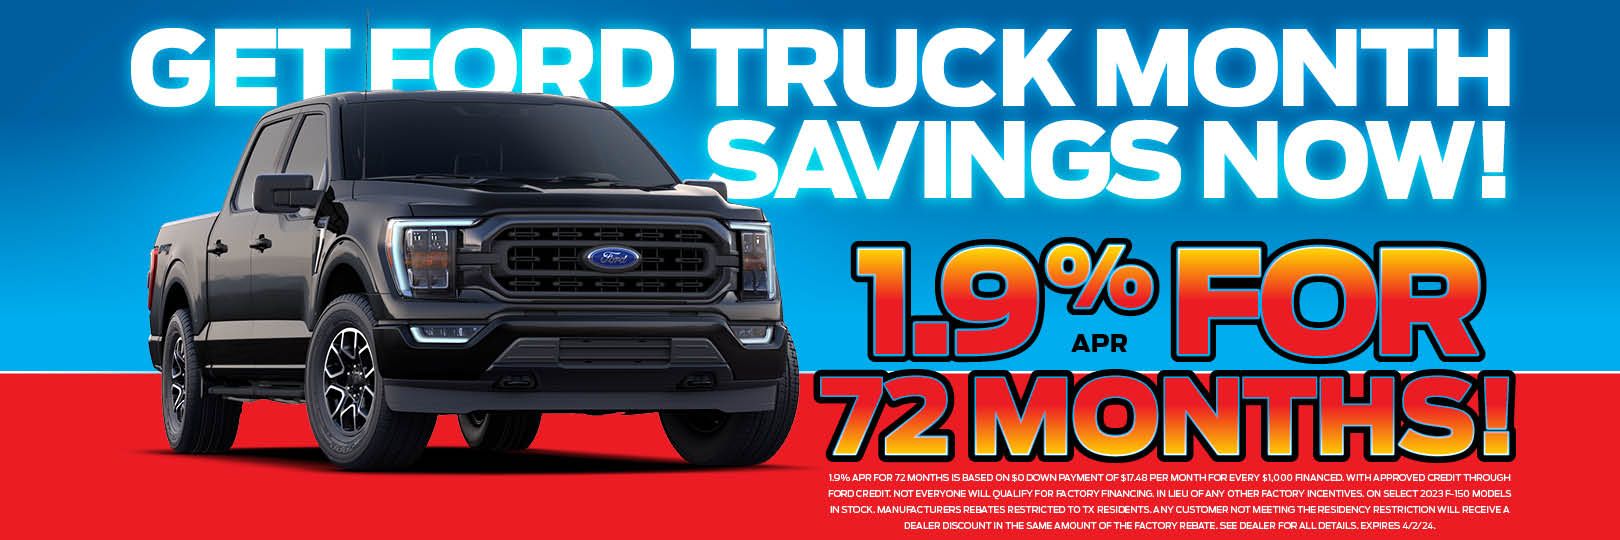 Ford Truck Month Savings